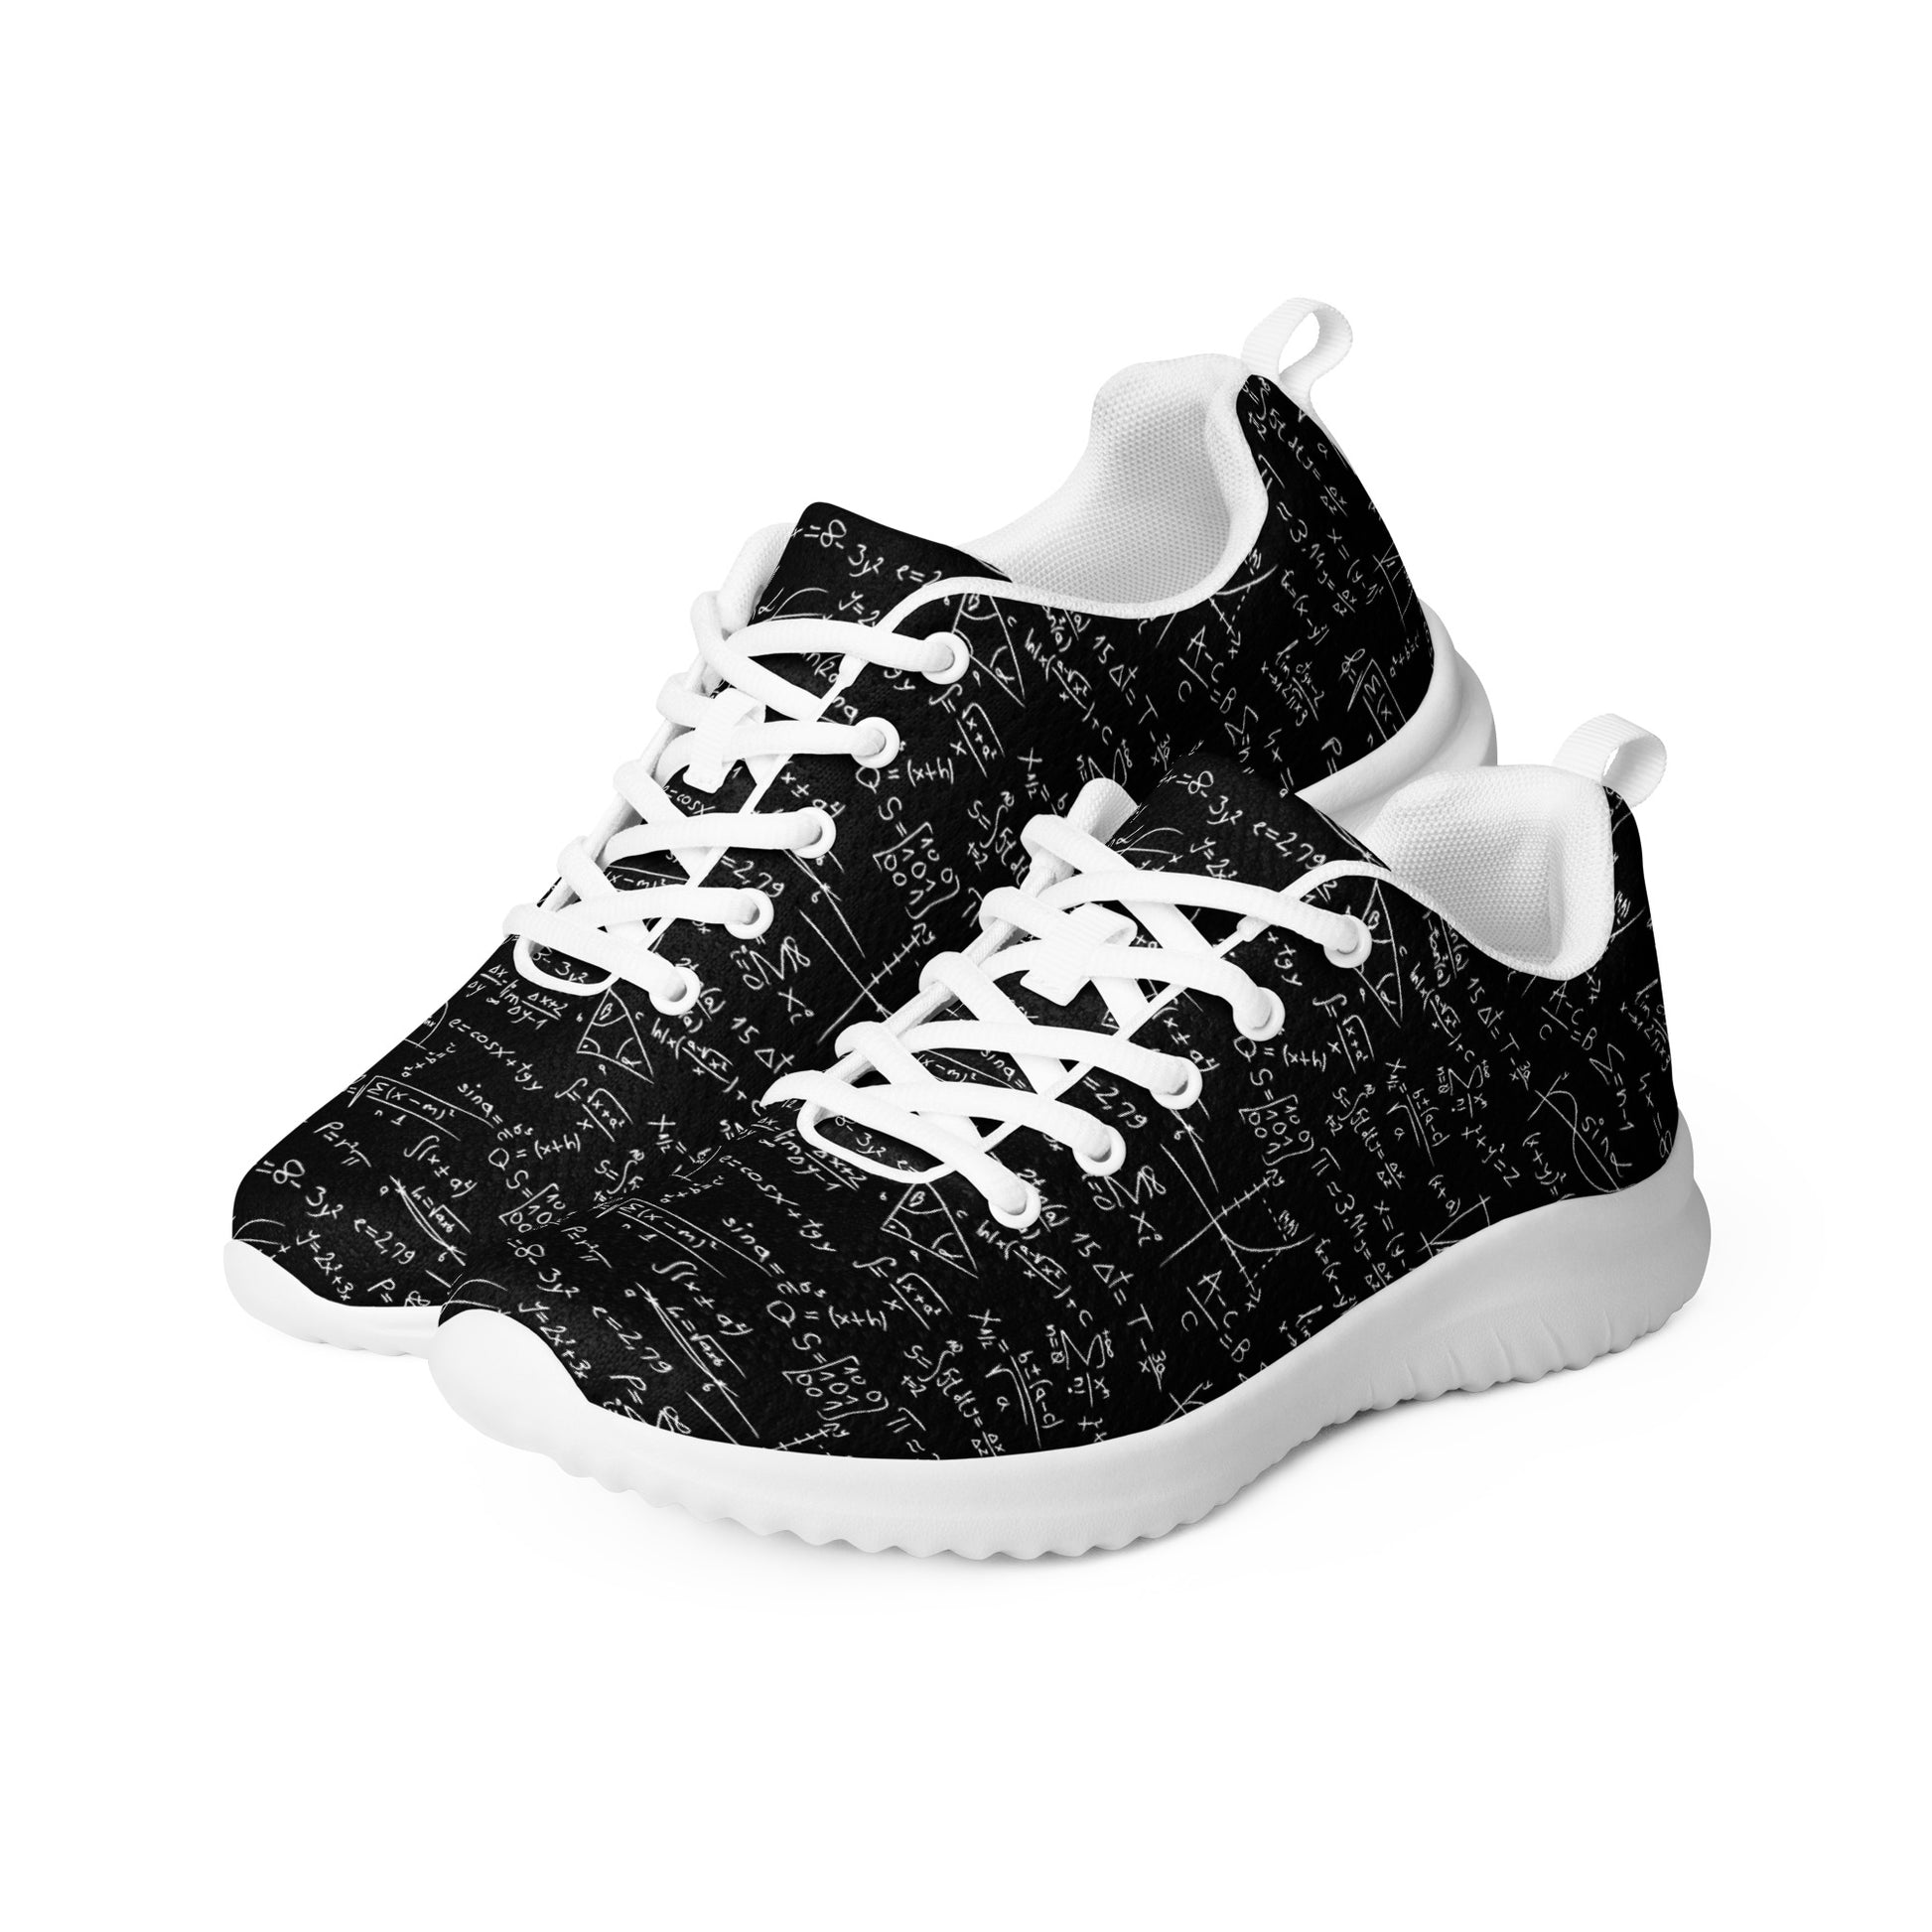 Equations - Women’s athletic shoes Womens Athletic Shoes